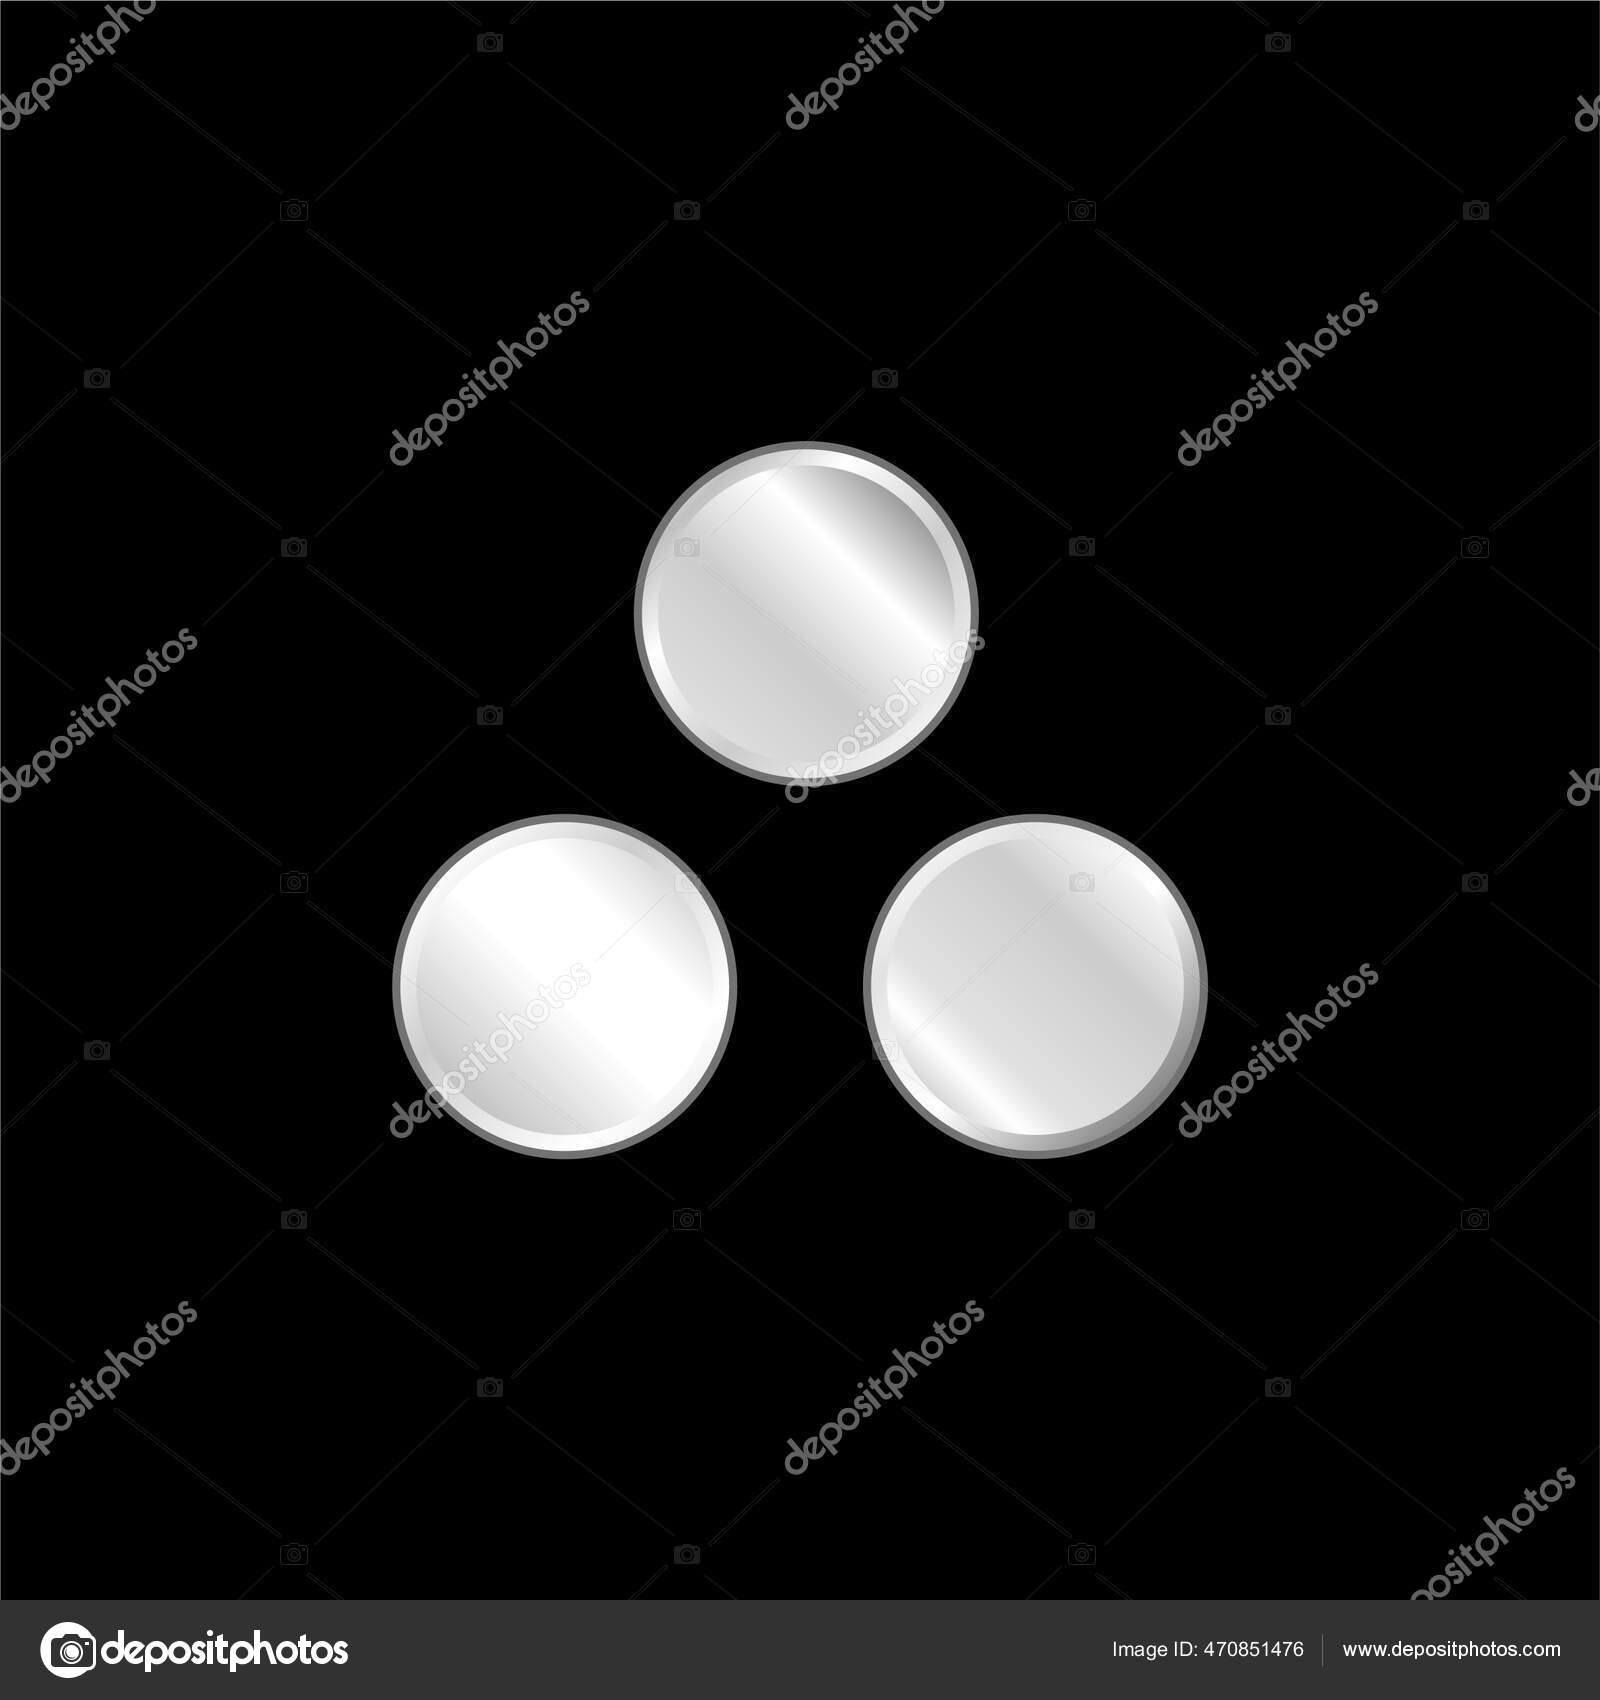 44 Munitions Vector Images Free Royalty Free Munitions Vectors Depositphotos